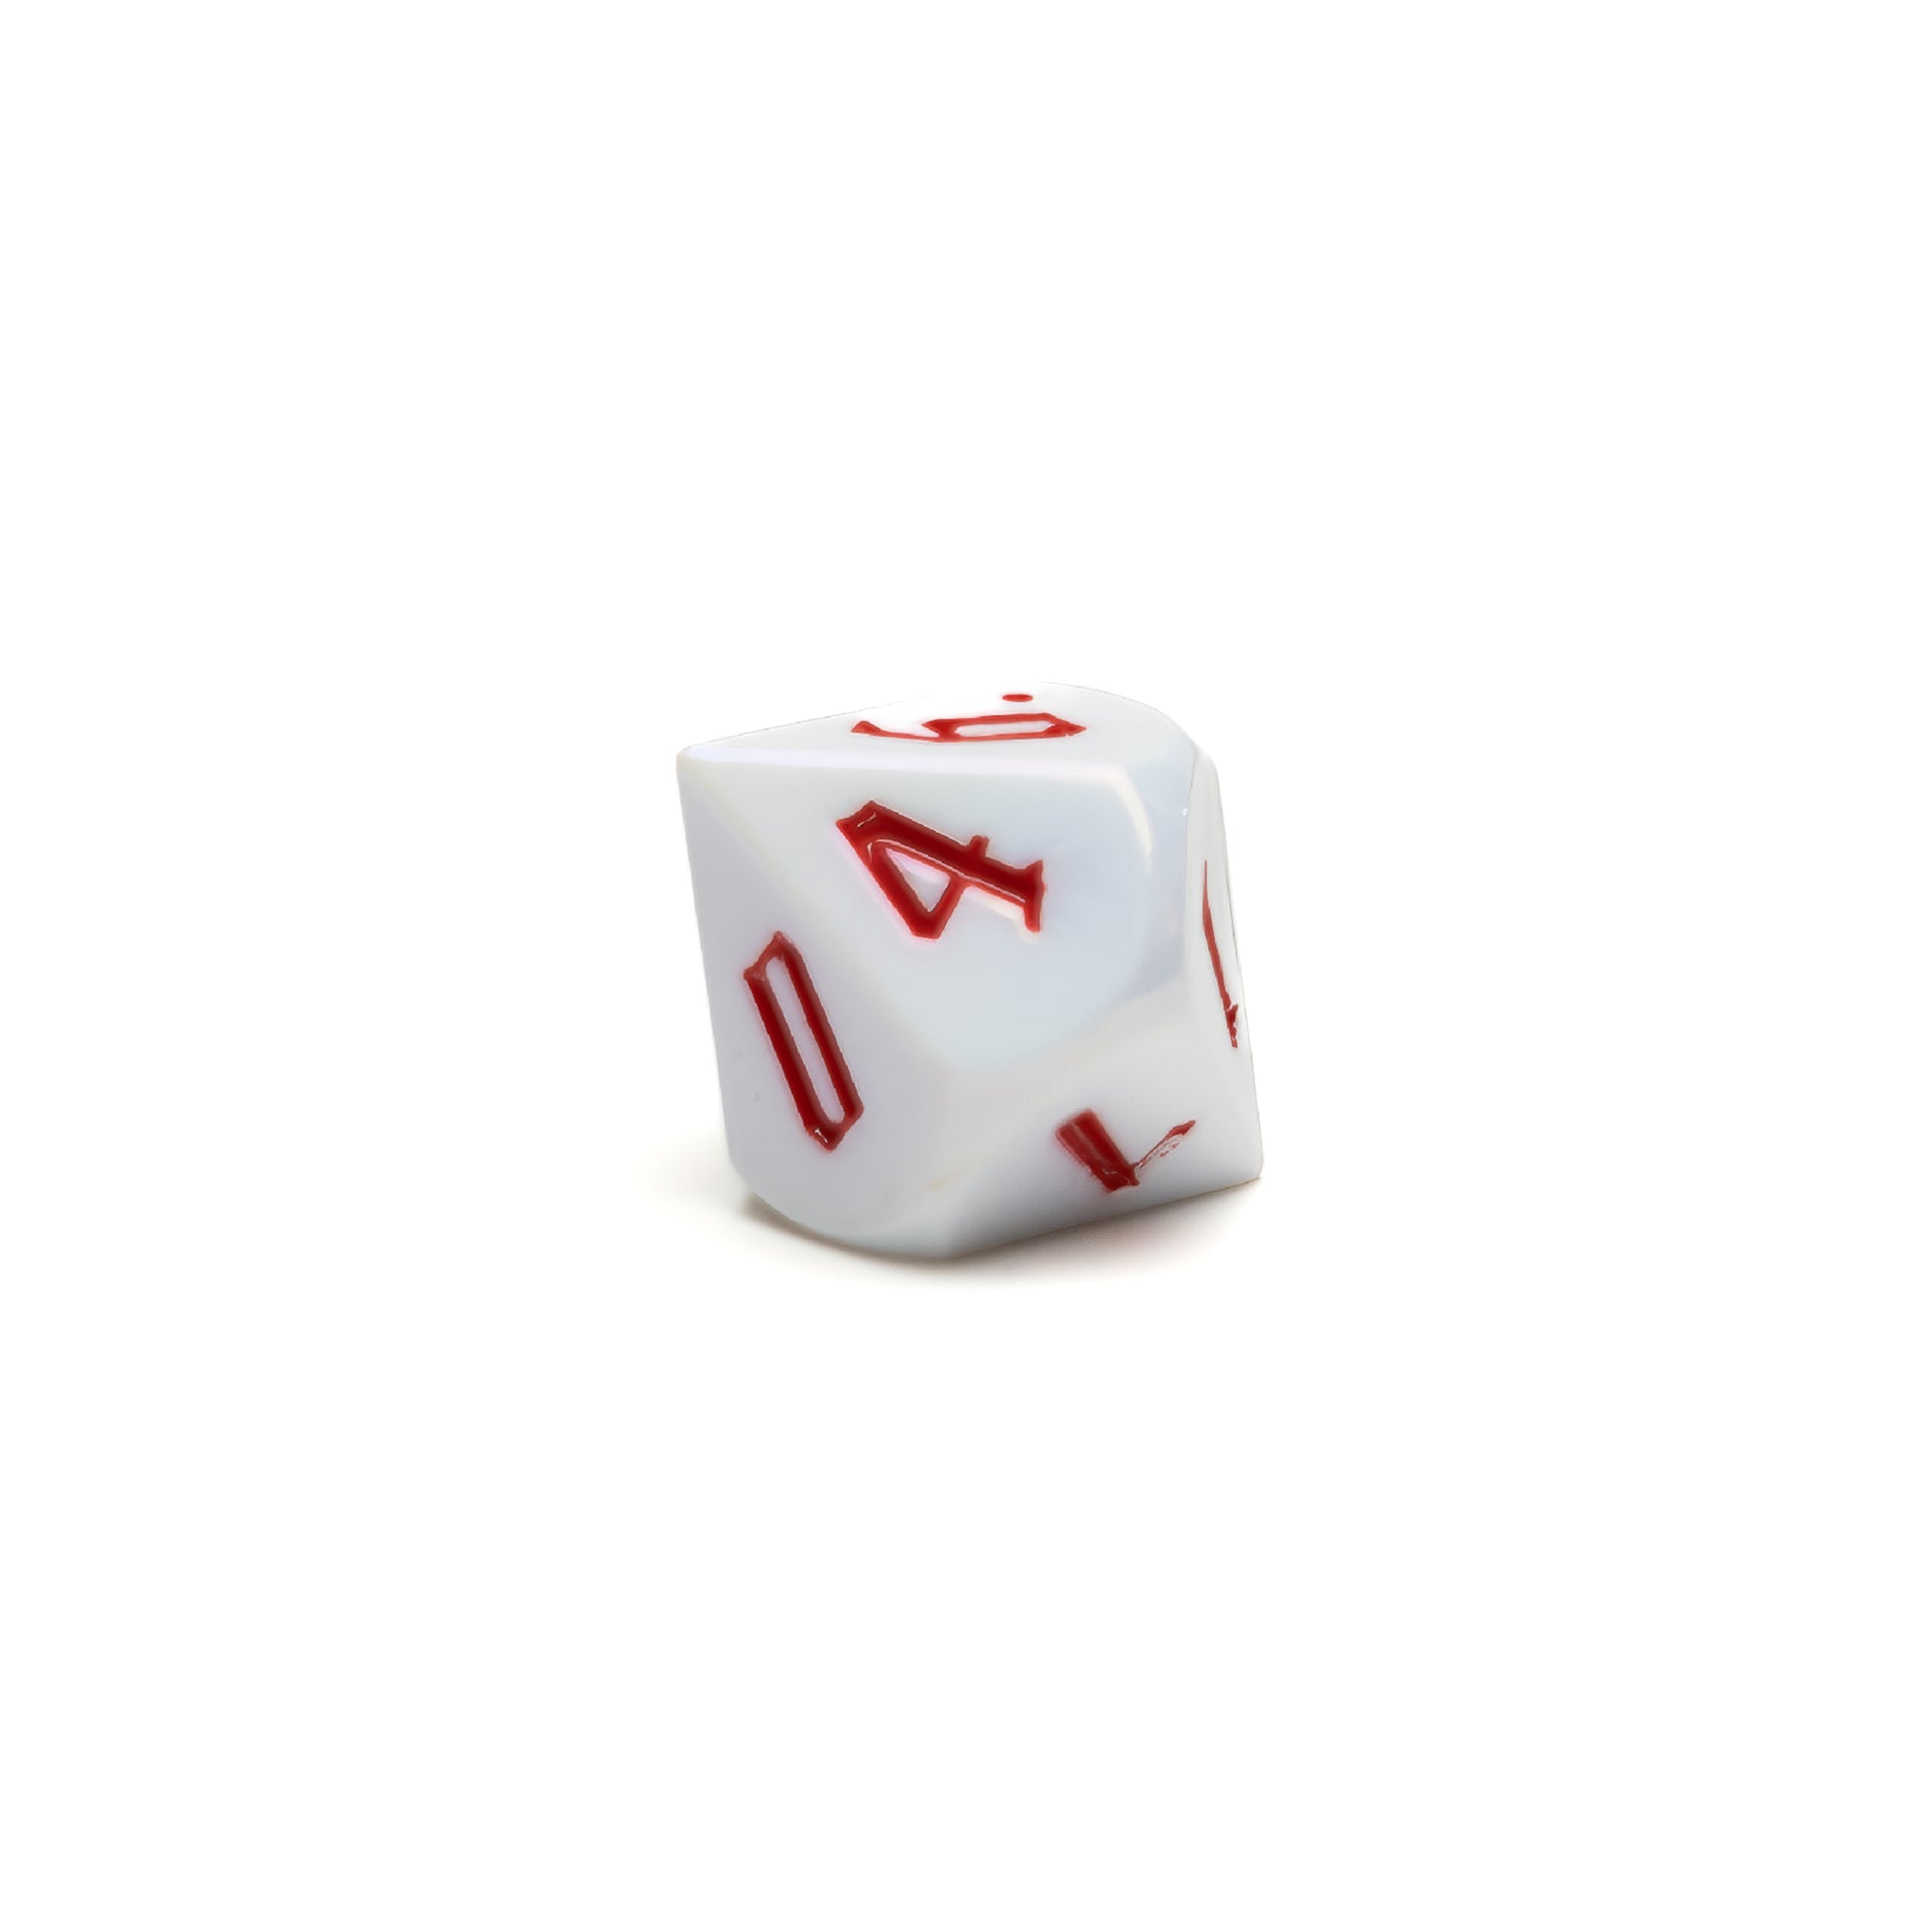 Roll Britannia Royal Guard Sharp Edged Electroplating Dungeons and Dragons D10 Dice with Red and White Aesthetic